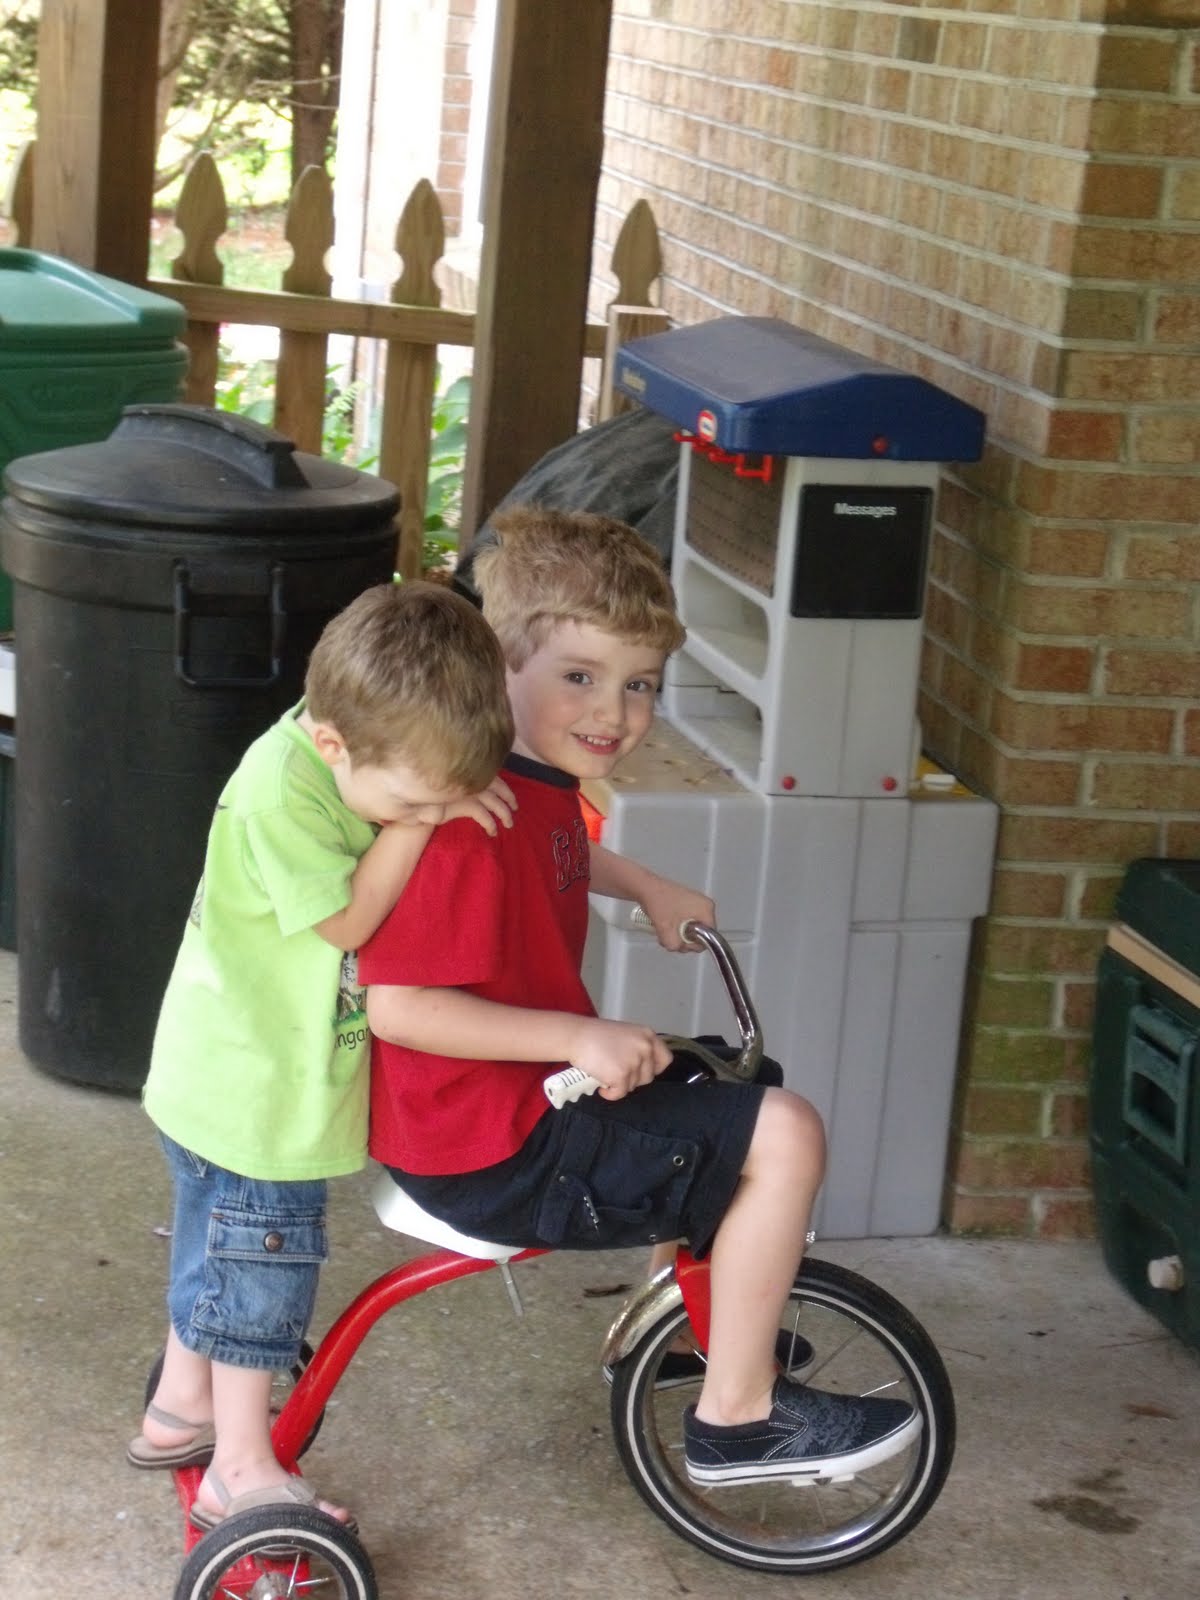 3 little Miracles: Wordless Wednesday - 2 litte Boys on a Tricycle